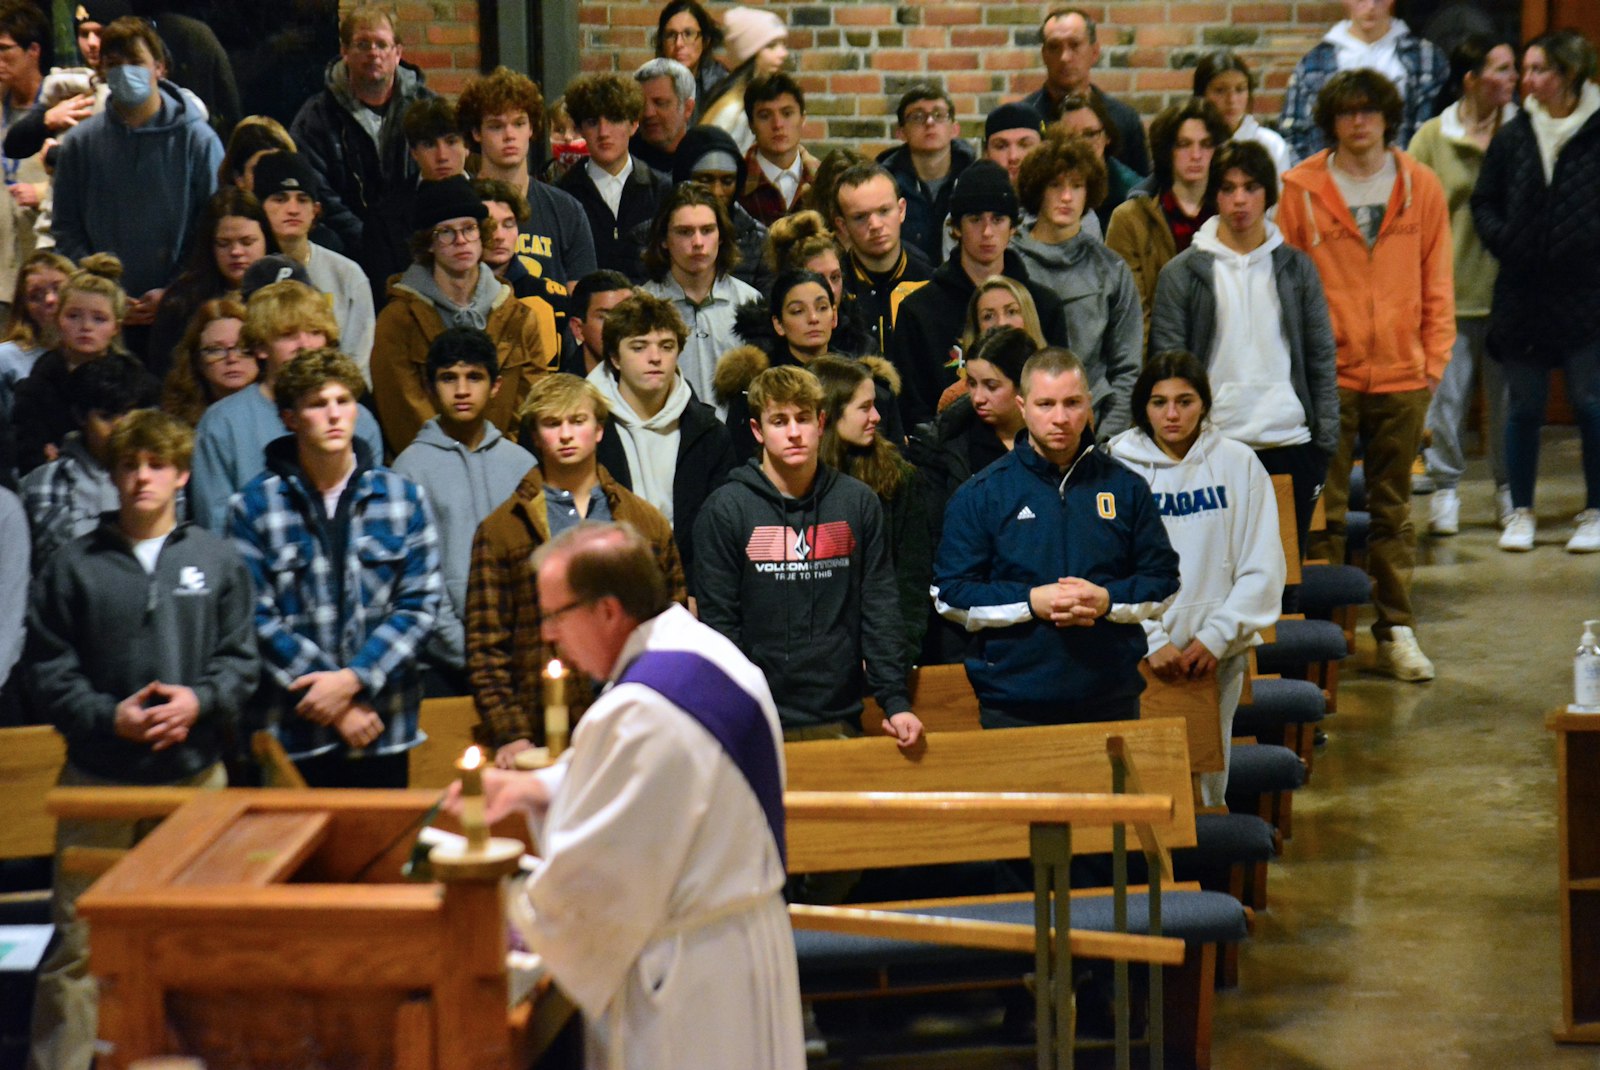 Oxford High School students, staff and parents listen as St. Joseph Deacon John Manera proclaims the Gospel. The church, which seats nearly 1,000 people, was filled during the community-wide Mass.